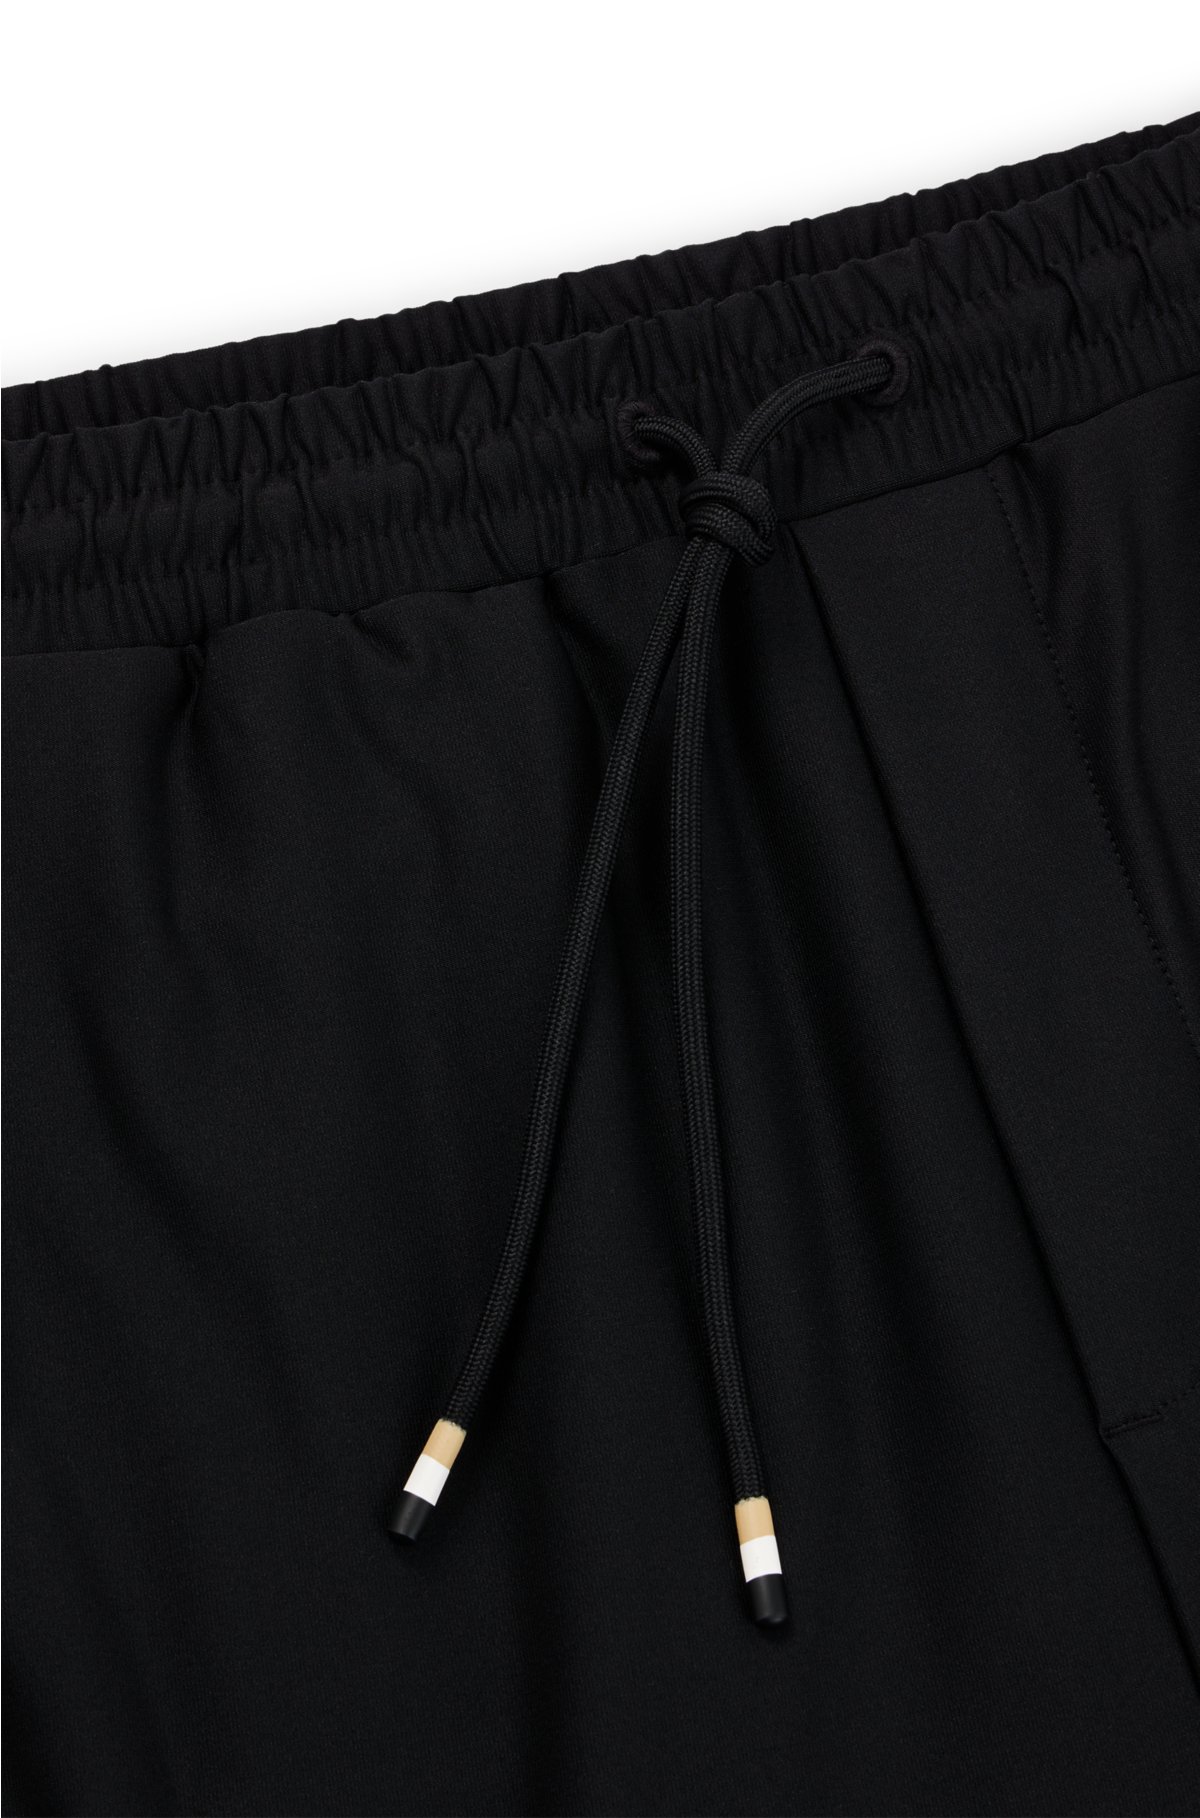 BOSS x Matteo Berrettini tracksuit bottoms with contrast tape and branding, Black